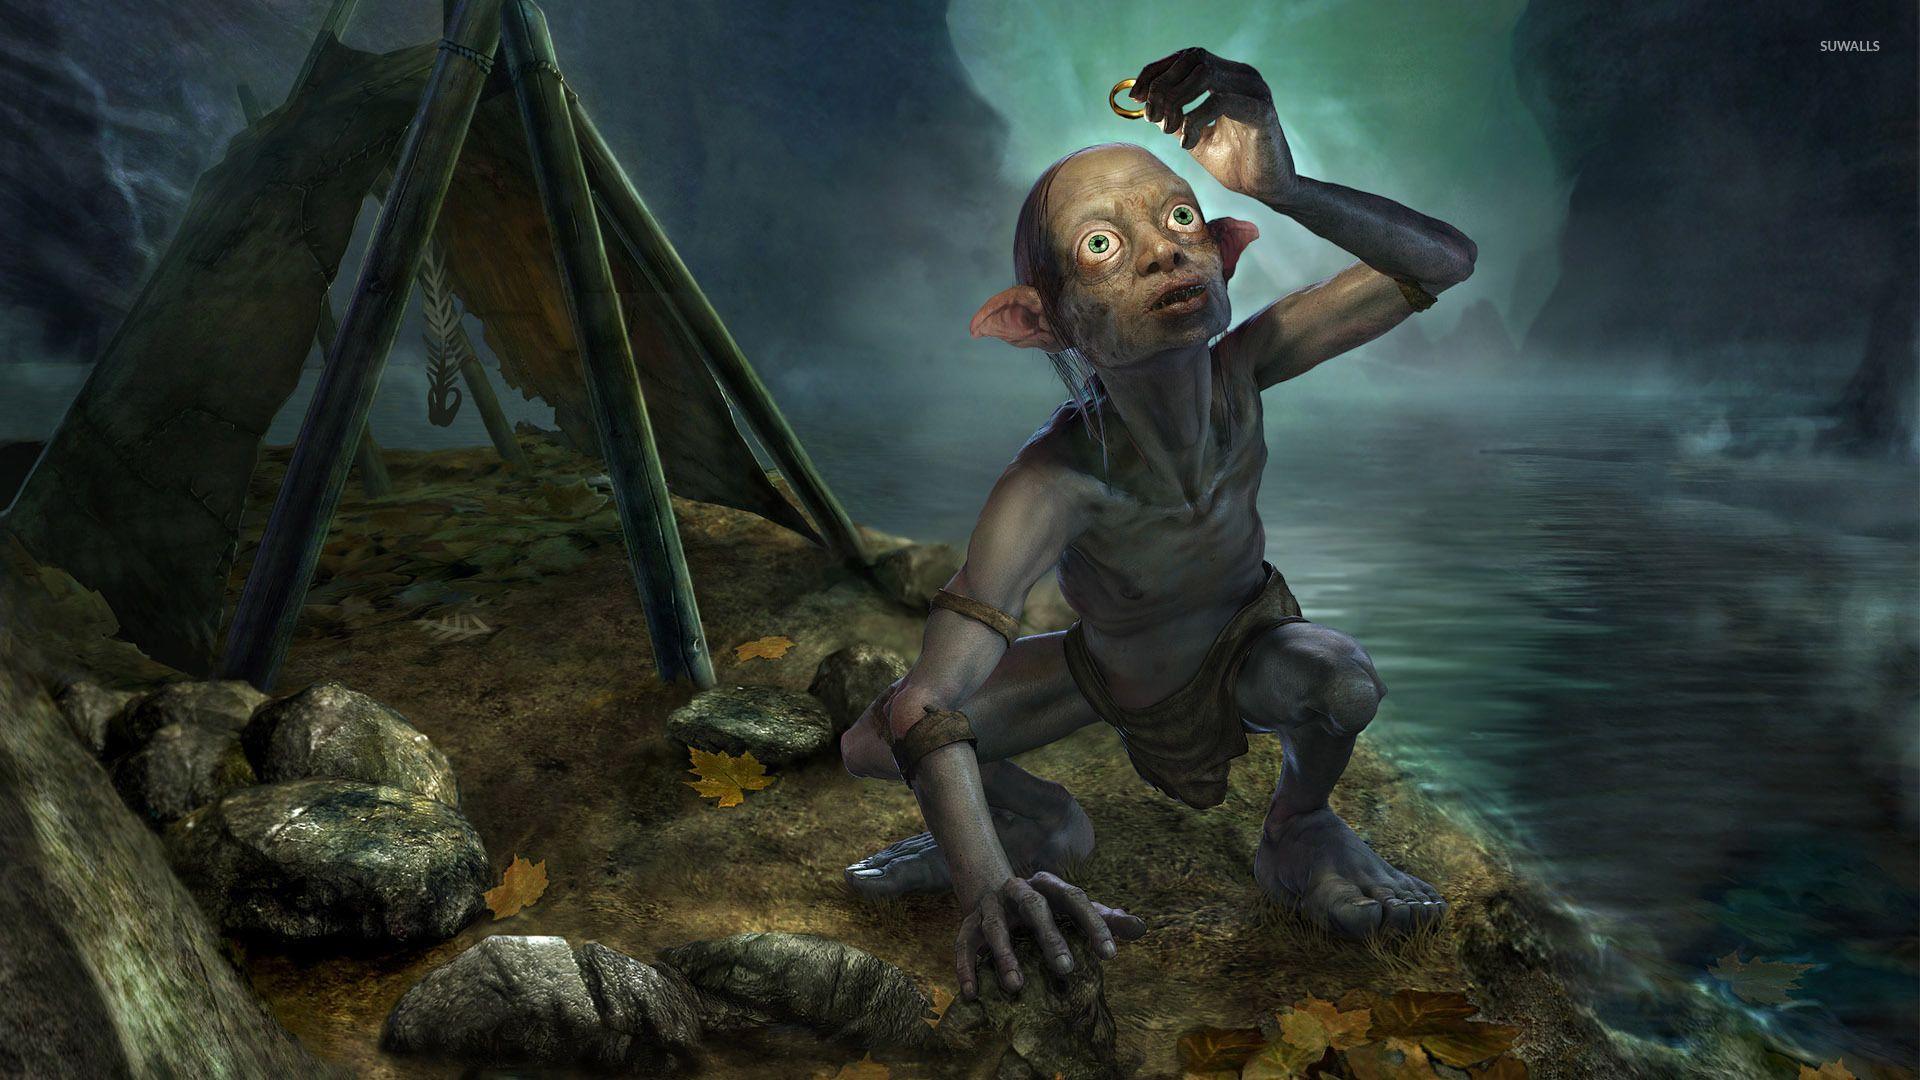 Gollum holding One Ring Lord of the Rings wallpaper